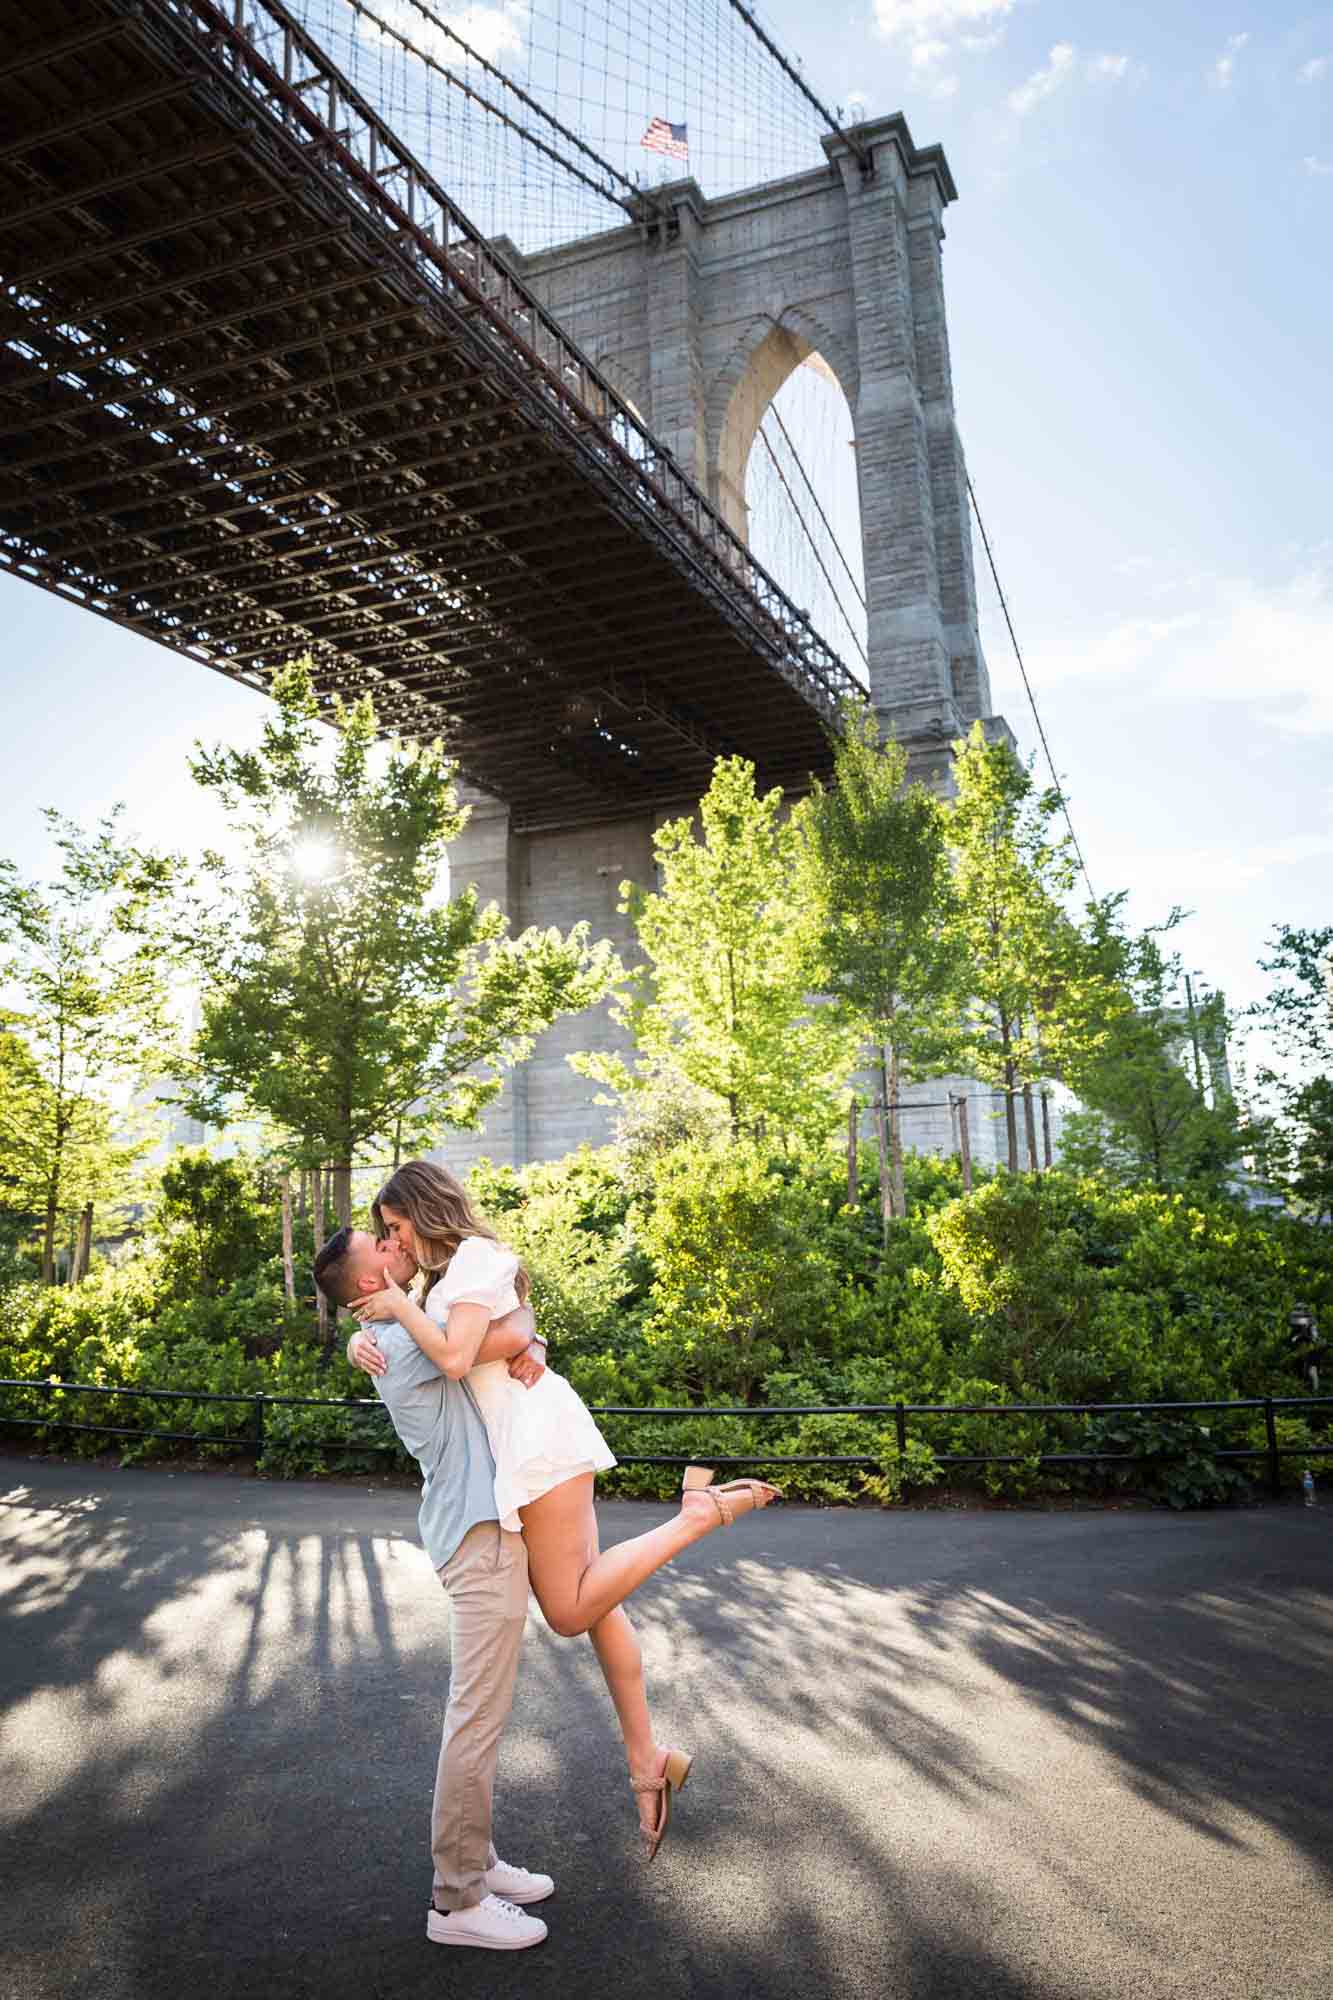 Man lifting woman in the air in front of Brooklyn Bridge during a surprise proposal in Brooklyn Bridge Park